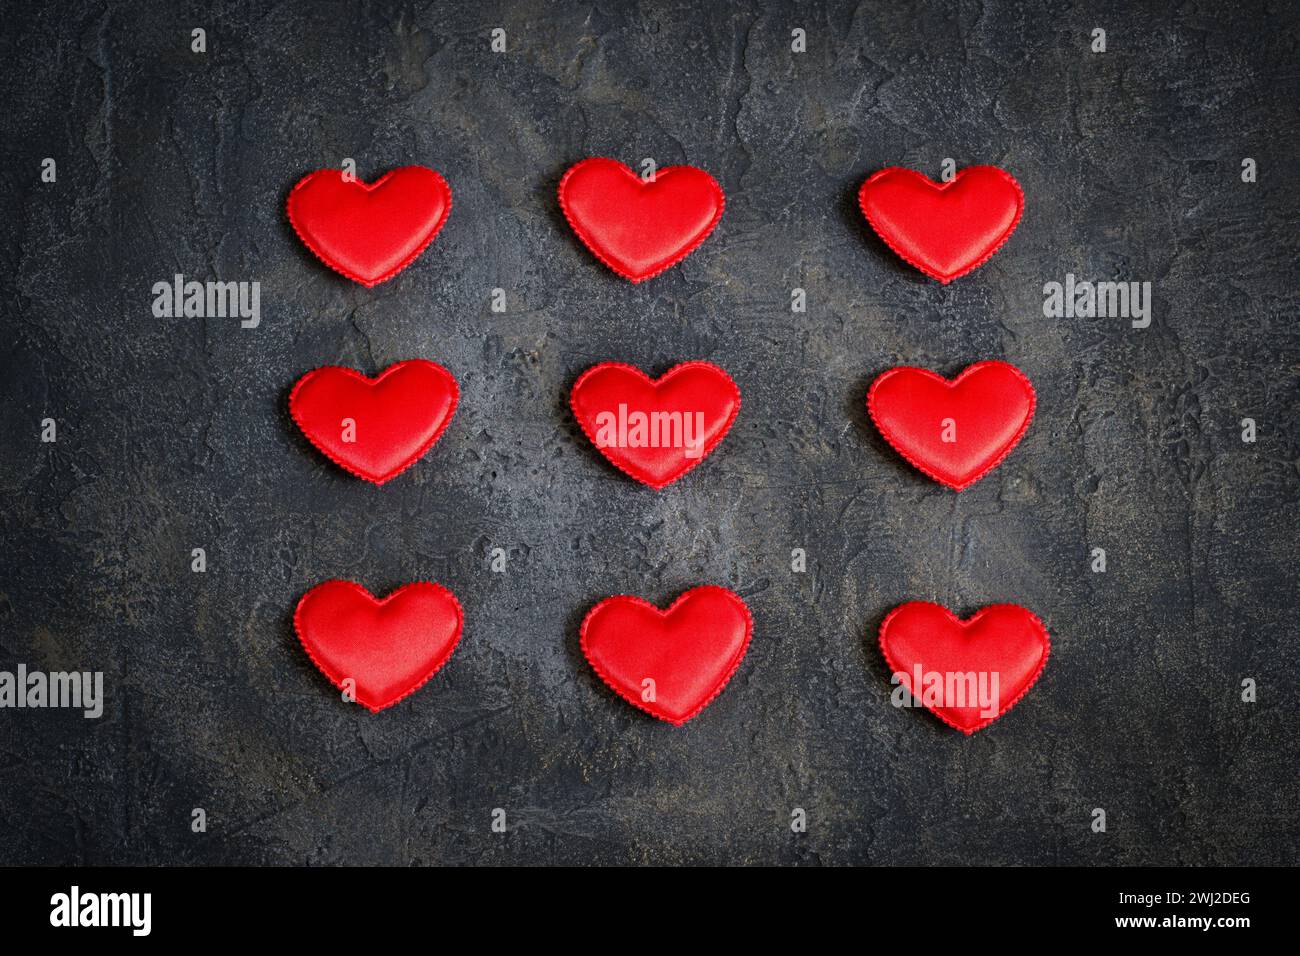 Satin red hearts on a dark background. Valentine's Day card. Stock Photo